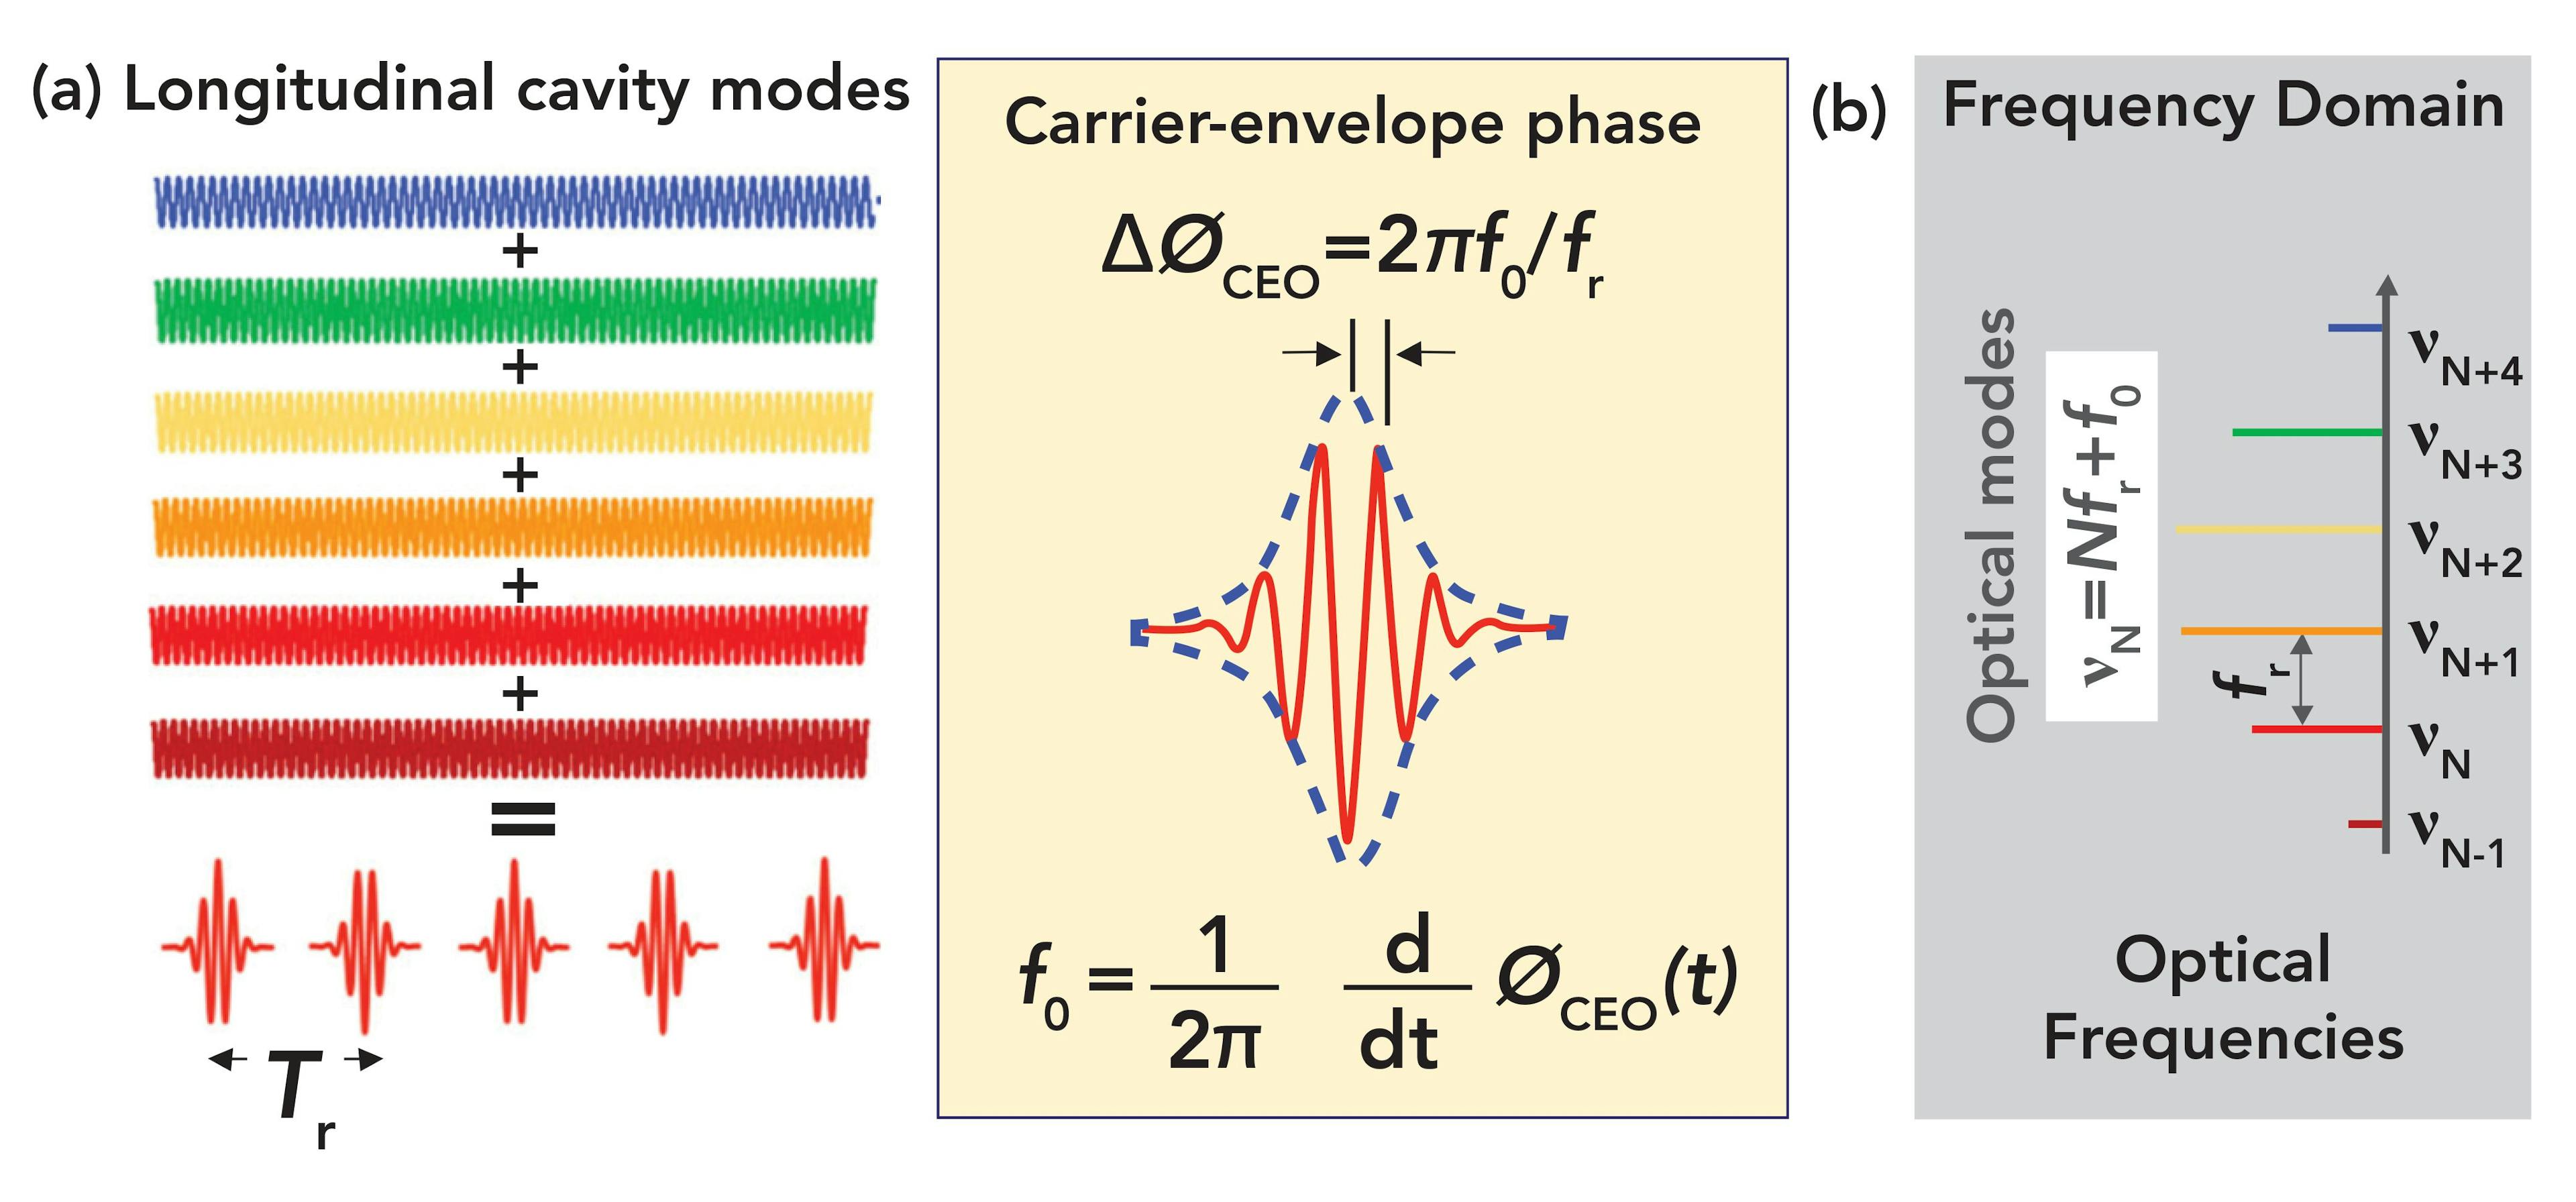 FIGURE 1: (a) The output of a mode-locked ultrafast laser contains components from a group of longitudinal cavity modes, collectively emitted with a time spacing of Tr at a frequency of fr. These modes each add to the laser pulse. Dispersion-induced phase- and group-velocity distributions relate to the coherence of the pulse, resulting in a frequency offset f0. (b) In frequency space, this periodic wavetrain can be described as a Fourier series, with each component frequency νN having a specific amplitude.